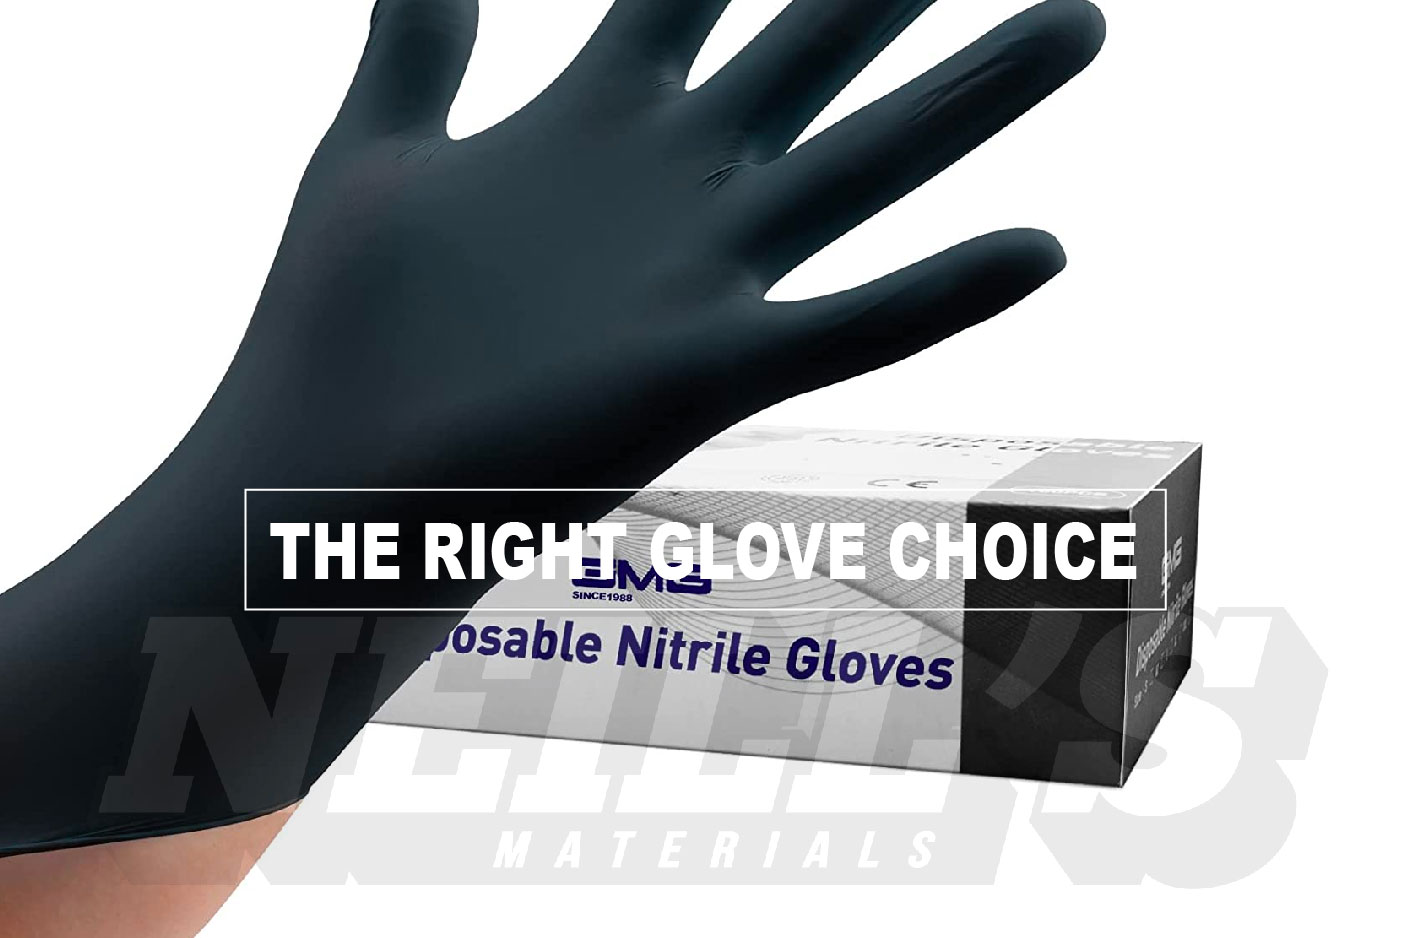 Neills Materials What Type of Rubber Glove Should I Wear to Risk Contamination